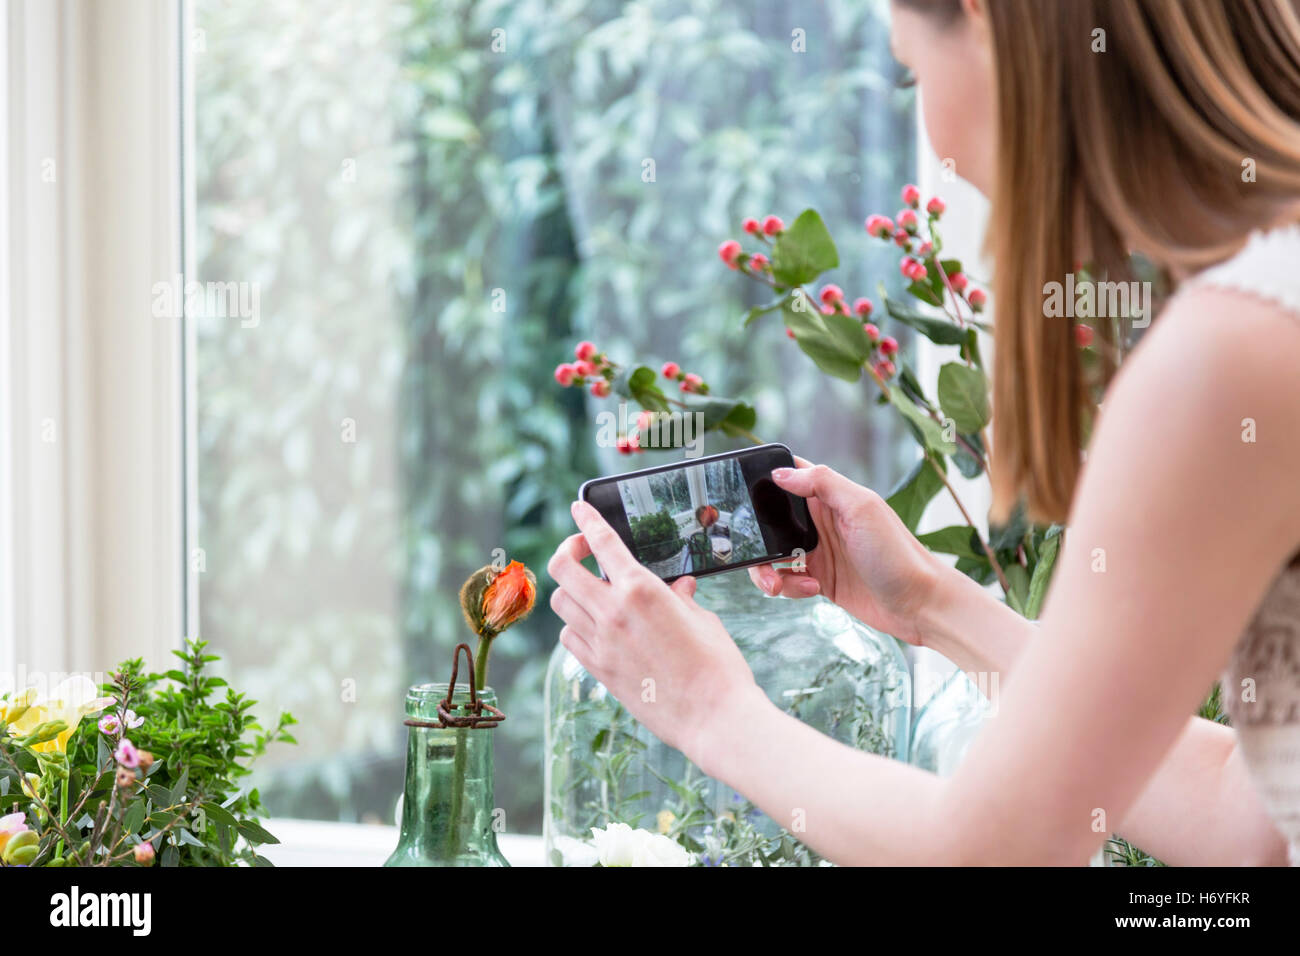 Over the shoulder view of woman using smartphone to take picture of flower in vase  Image downloaded by Hannah Zeffert at 13:44 Stock Photo